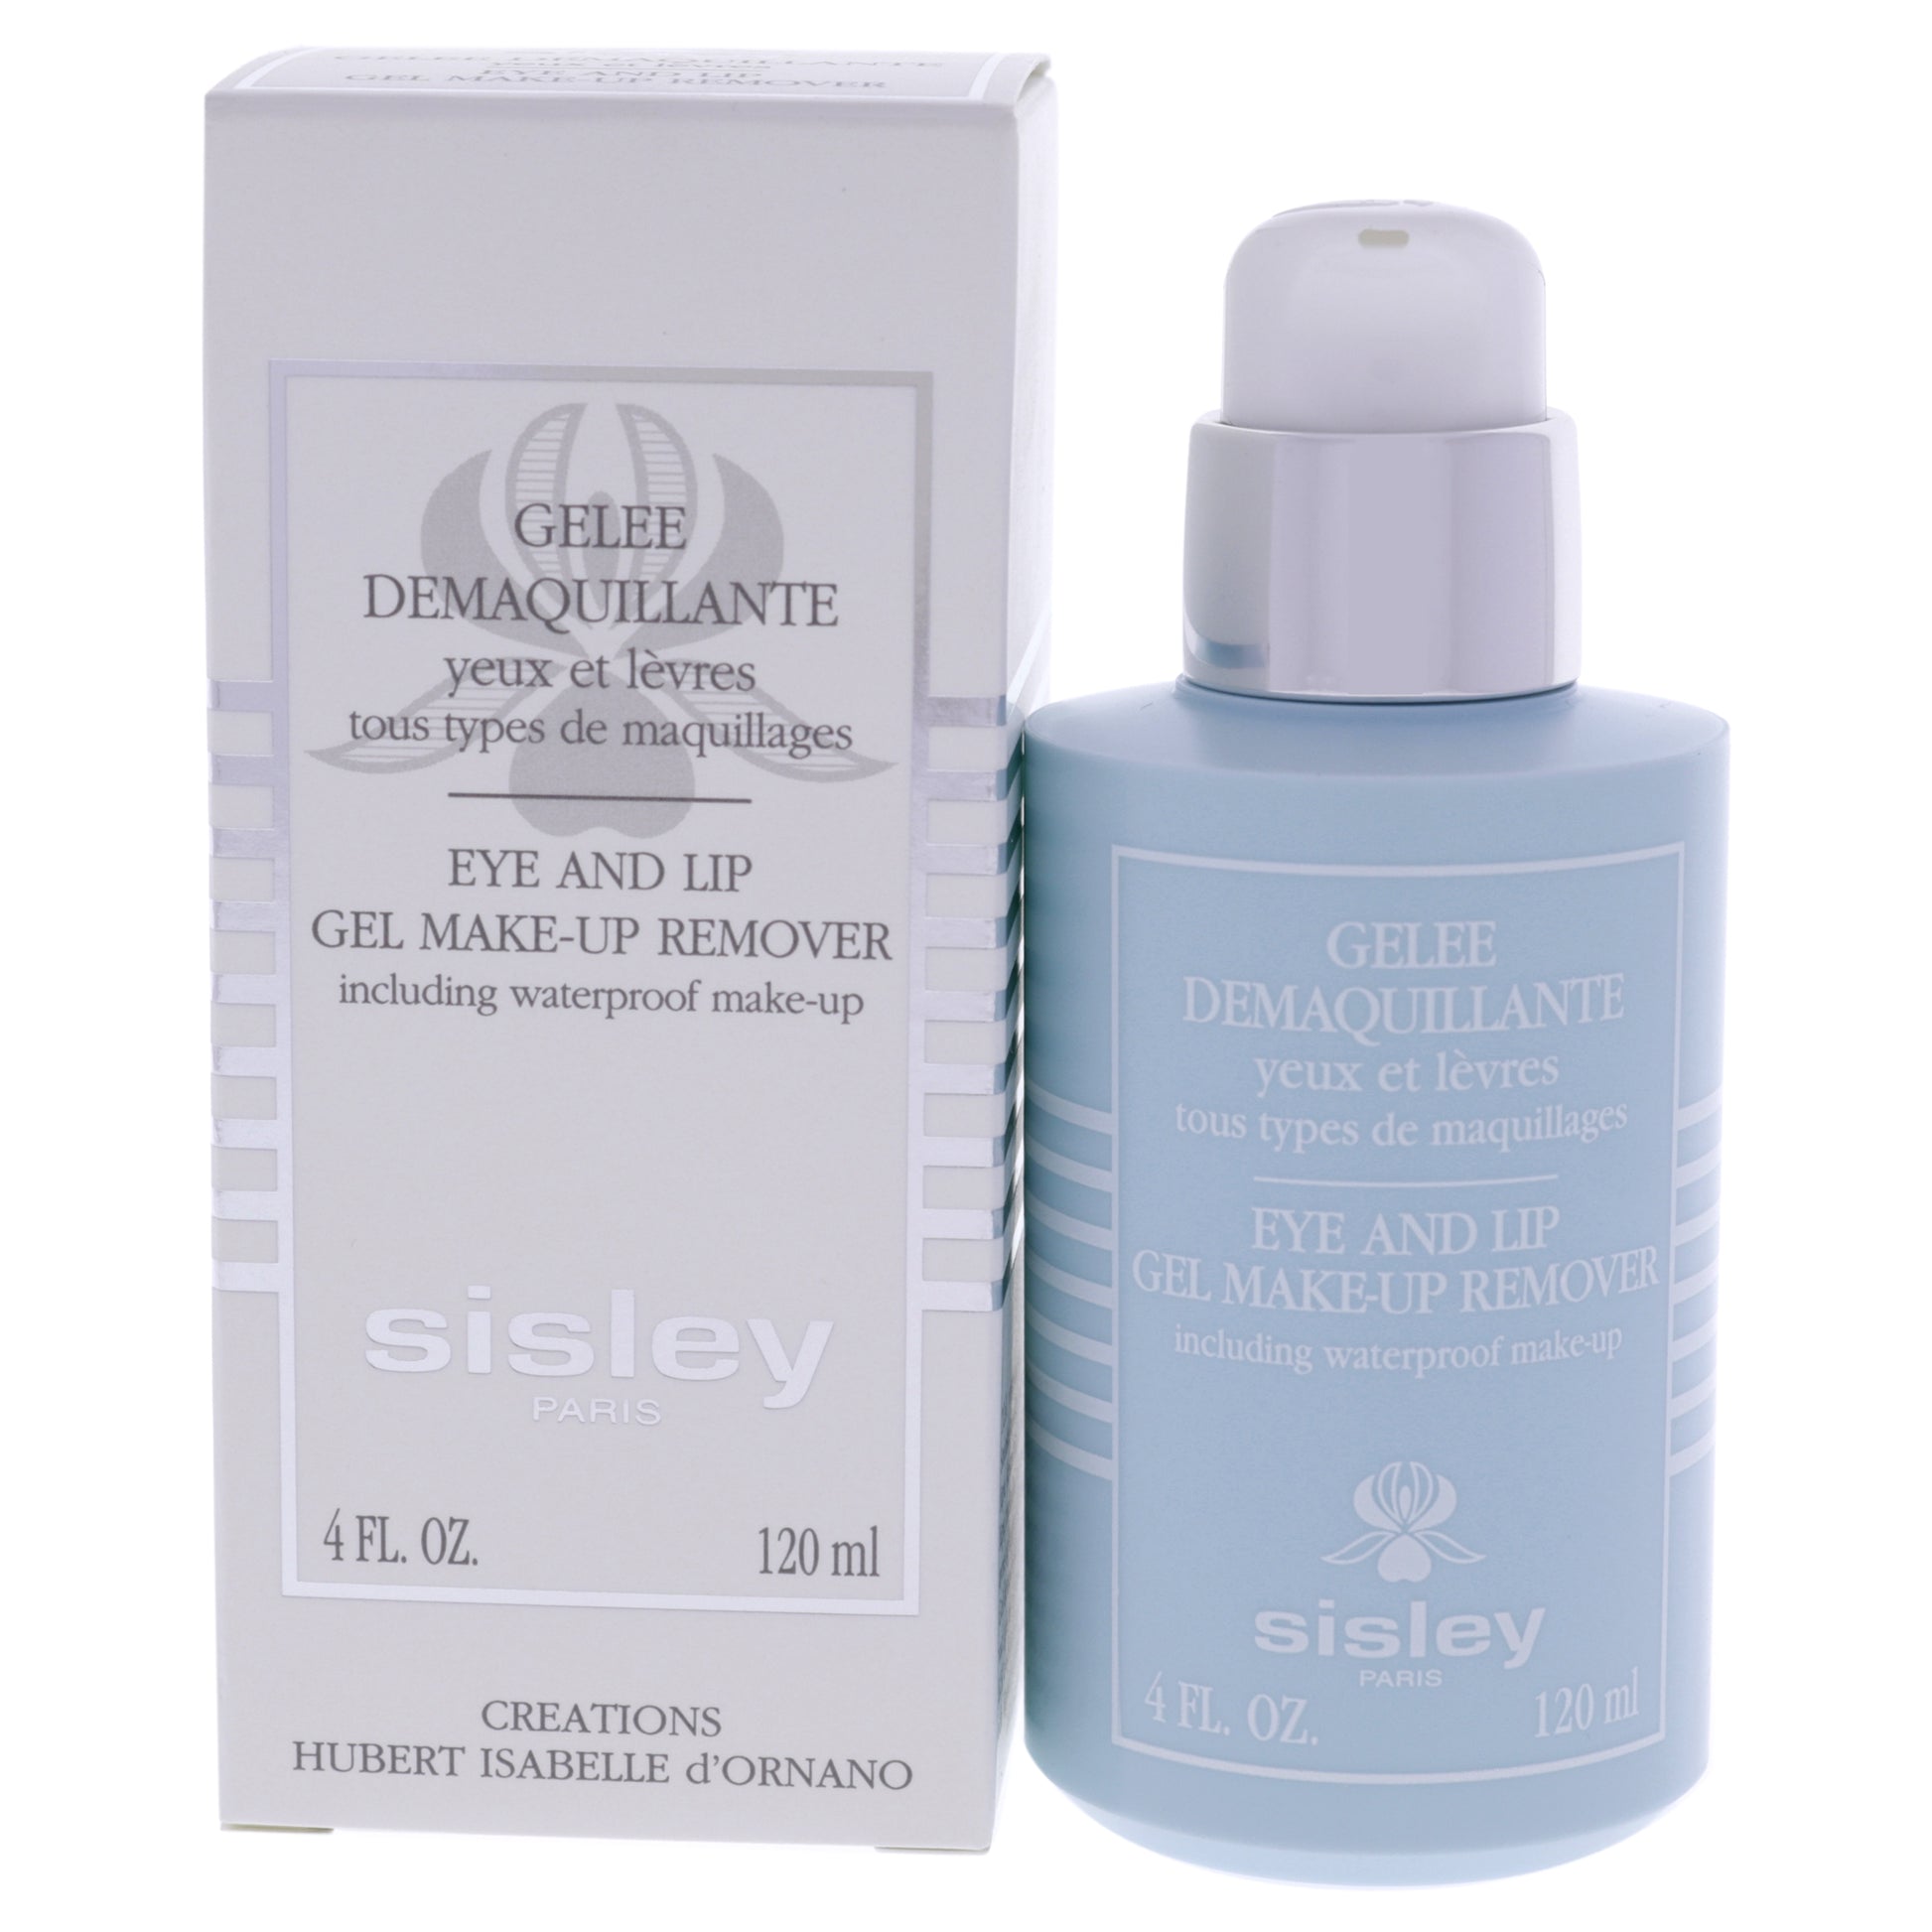 Gentle Eye & Lip Gel Make-Up Remover by Sisley for Women - 4.2 oz Makeup Remover Click to open in modal